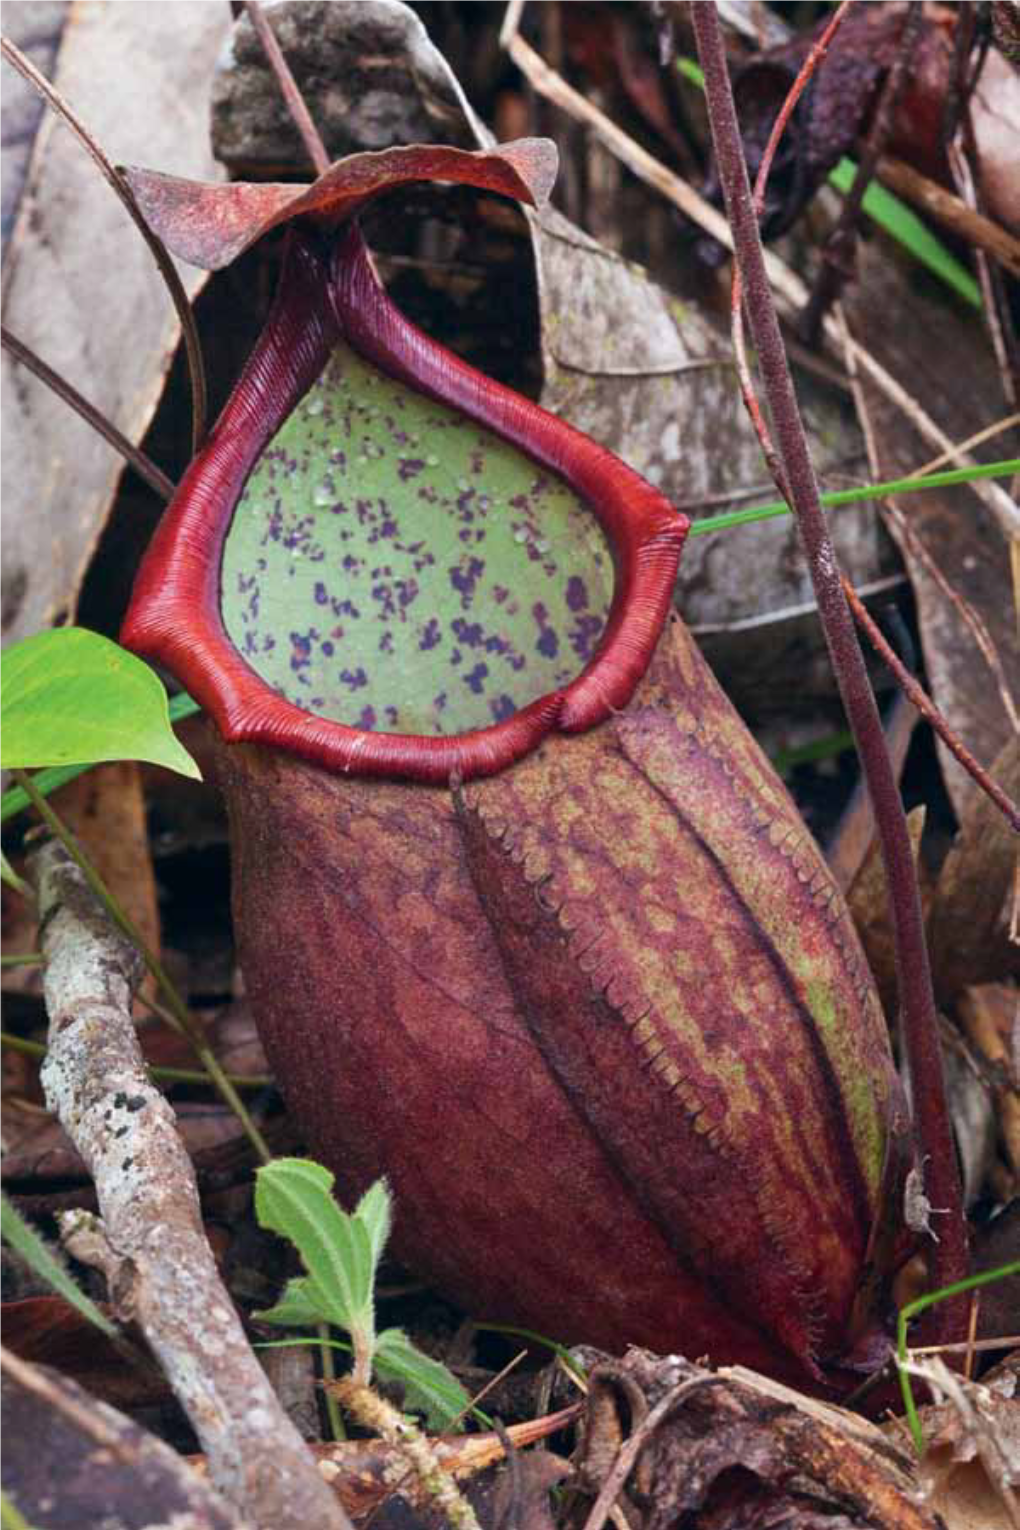 Nepenthes Thorelii, an Emended Description and Novel Ecological Data Resulting from Its Rediscovery in Tay Ninh, Vietnam